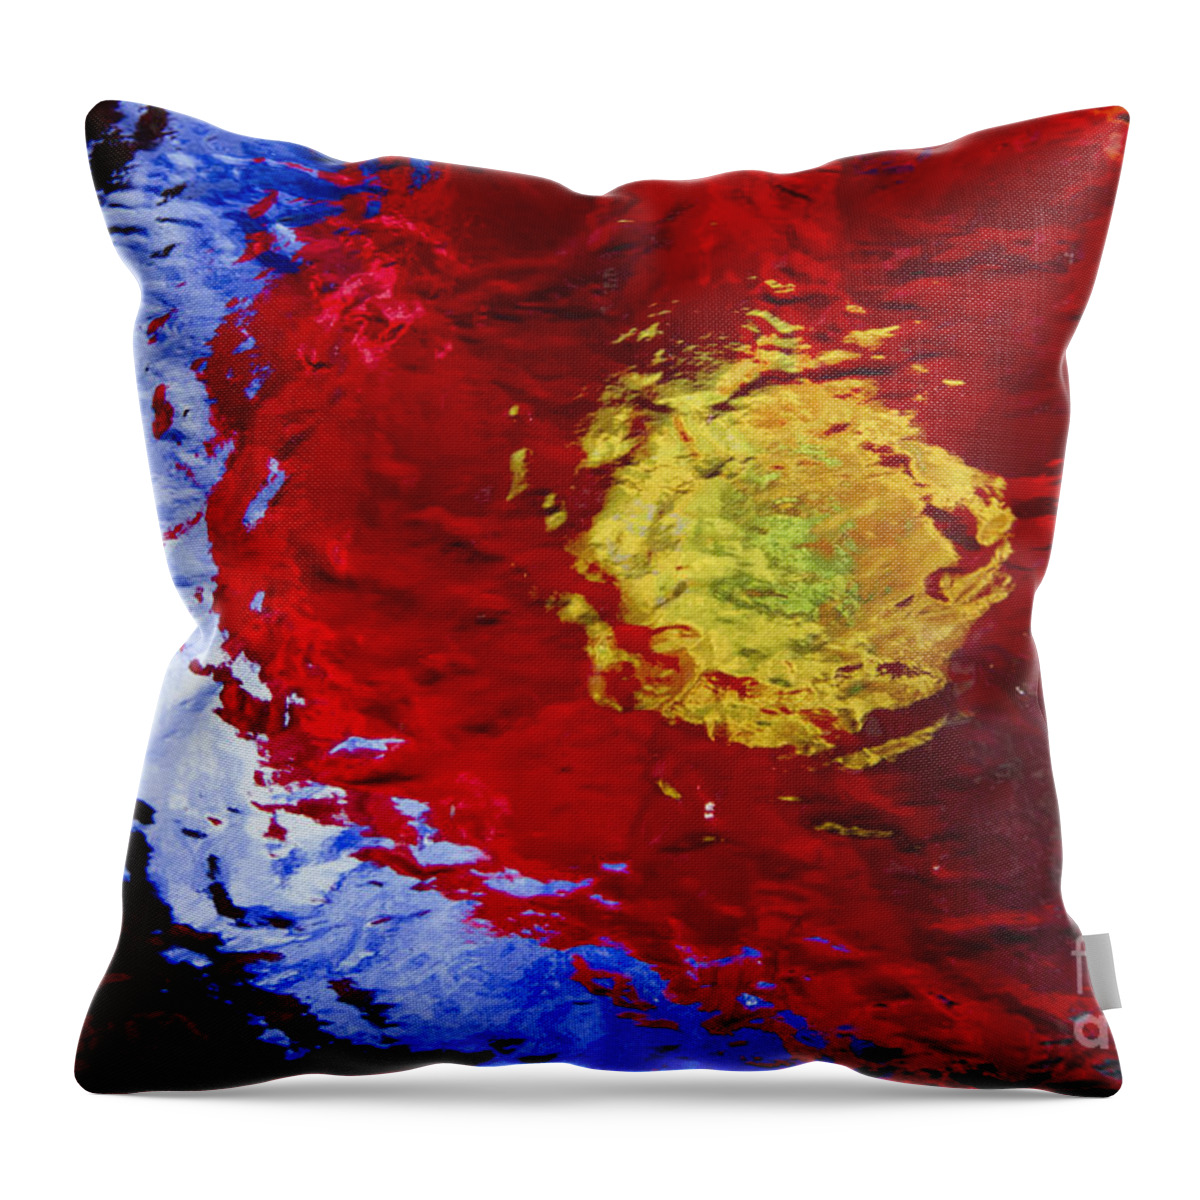 Red Throw Pillow featuring the photograph Poppy Impressions by Jeanette French